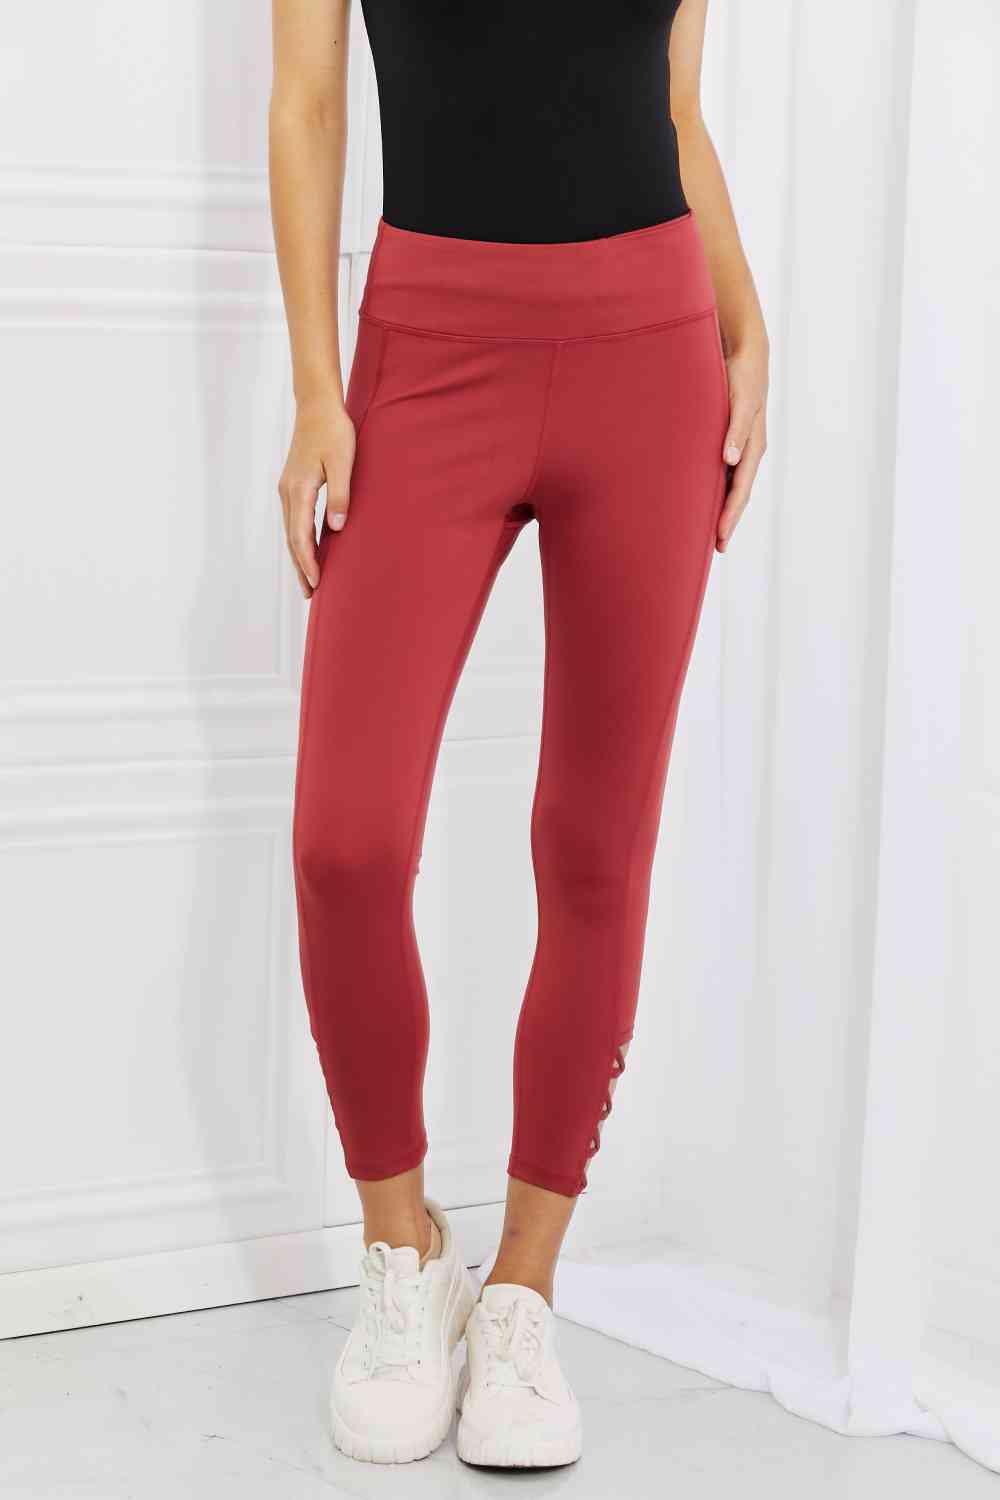 Yelete Ready For Action Full Size Ankle Cutout Active Leggings in Brick Red BLUE ZONE PLANET